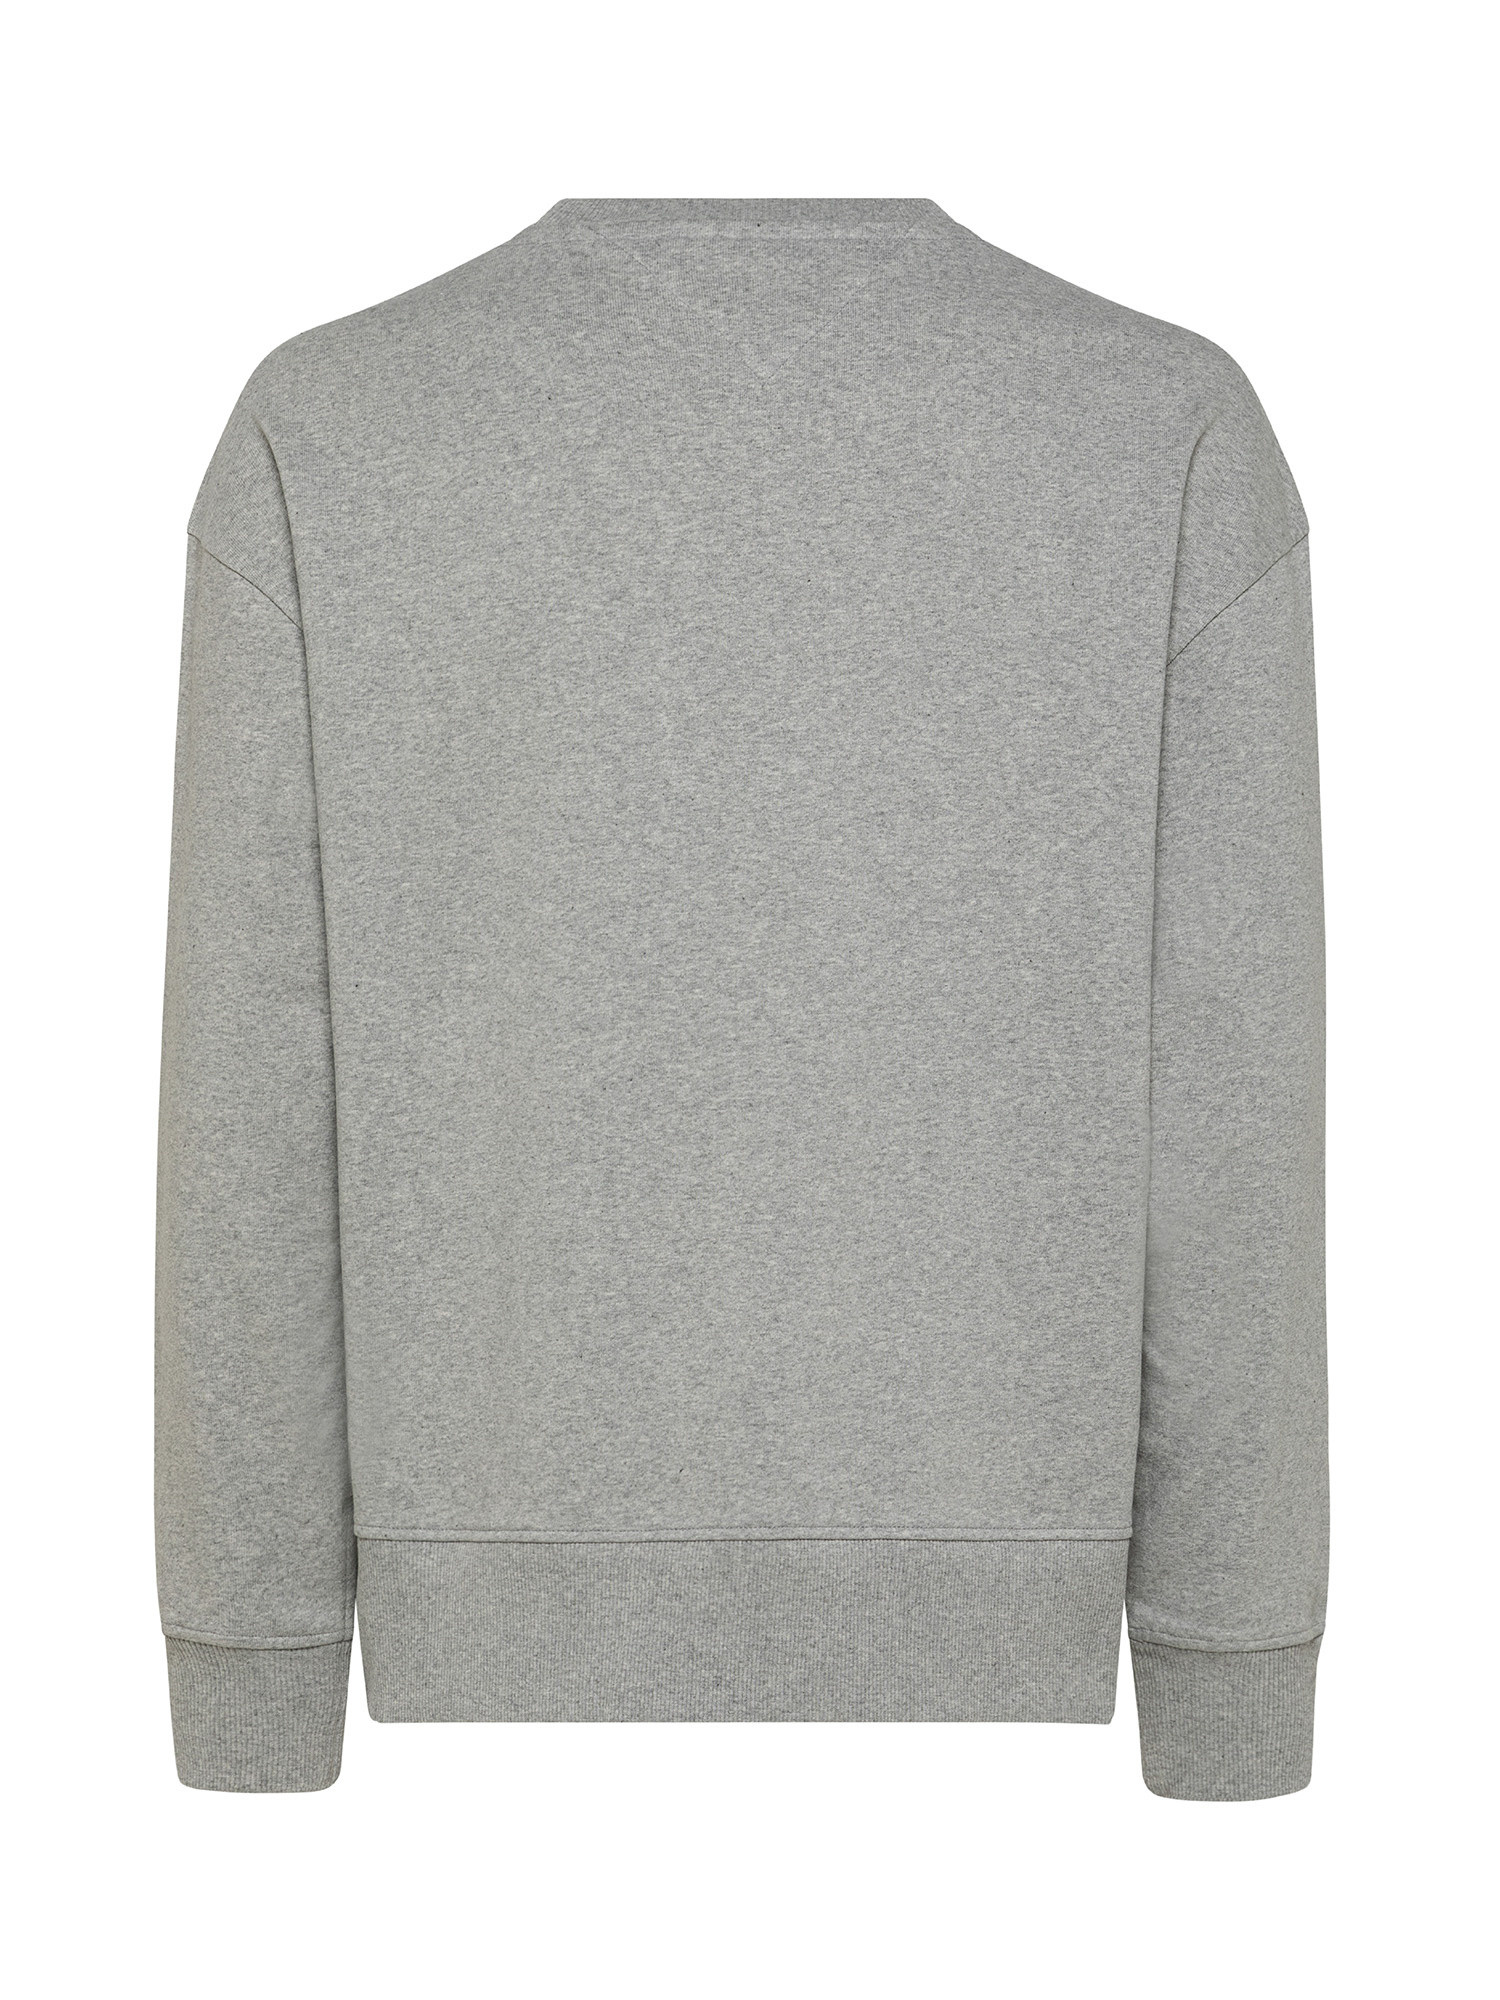 Tommy Jeans - Sweatshirt with signature logo, Grey, large image number 1